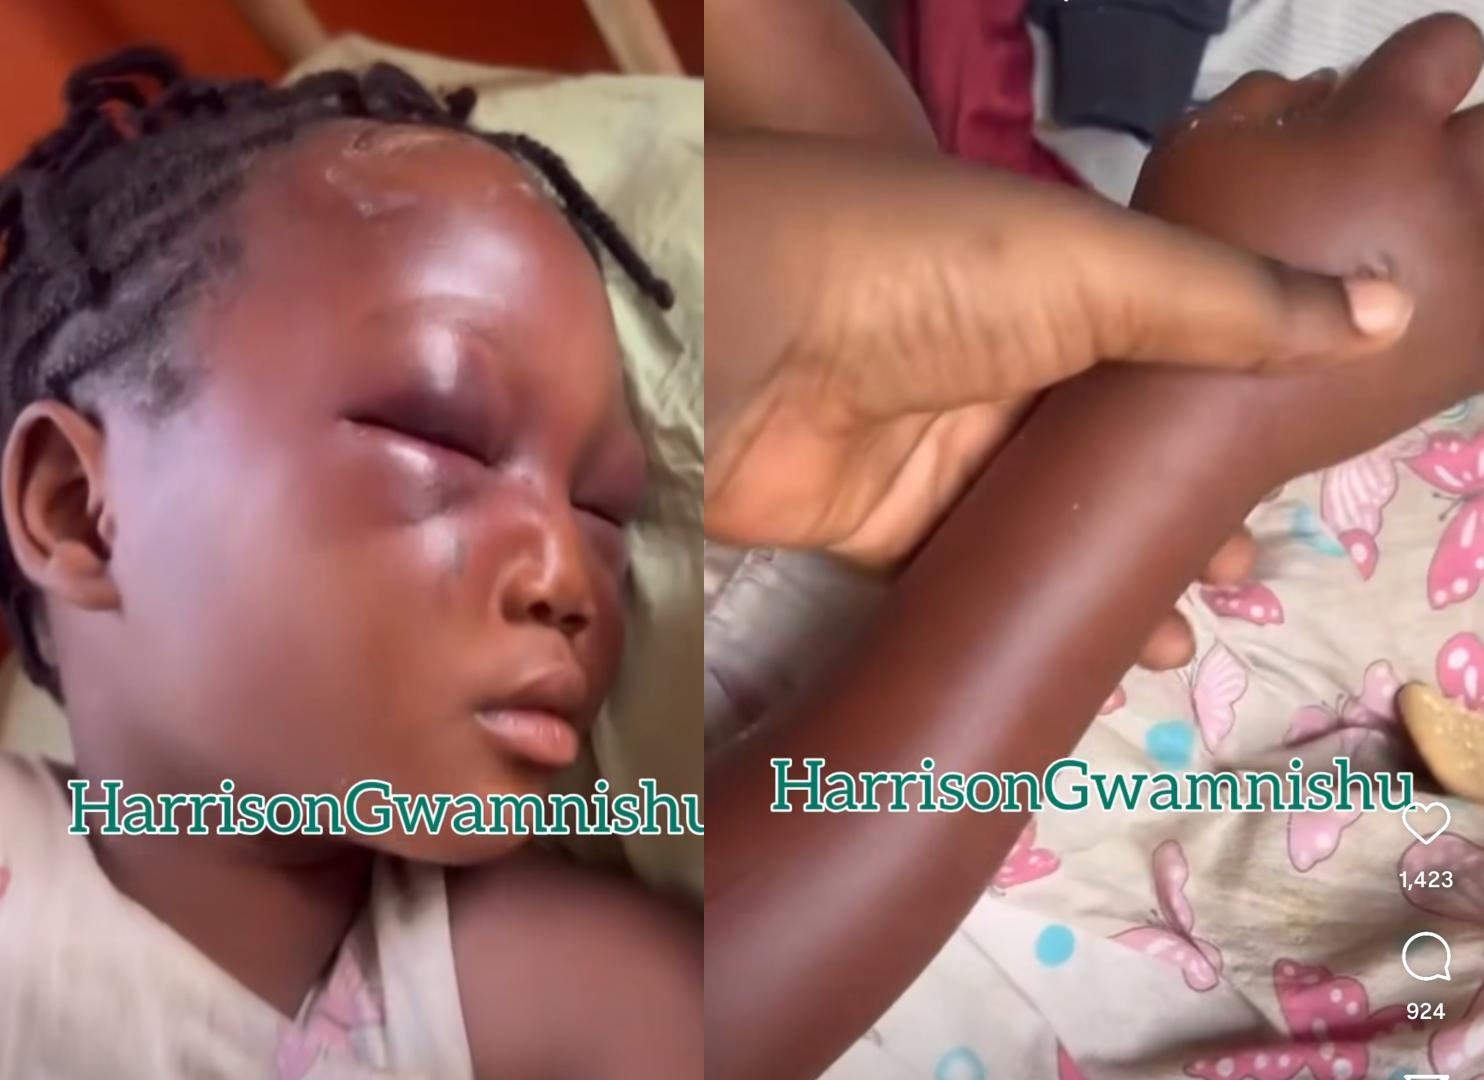 Eight year old left with swollen eyes and hands after she was assaulted by her aunt